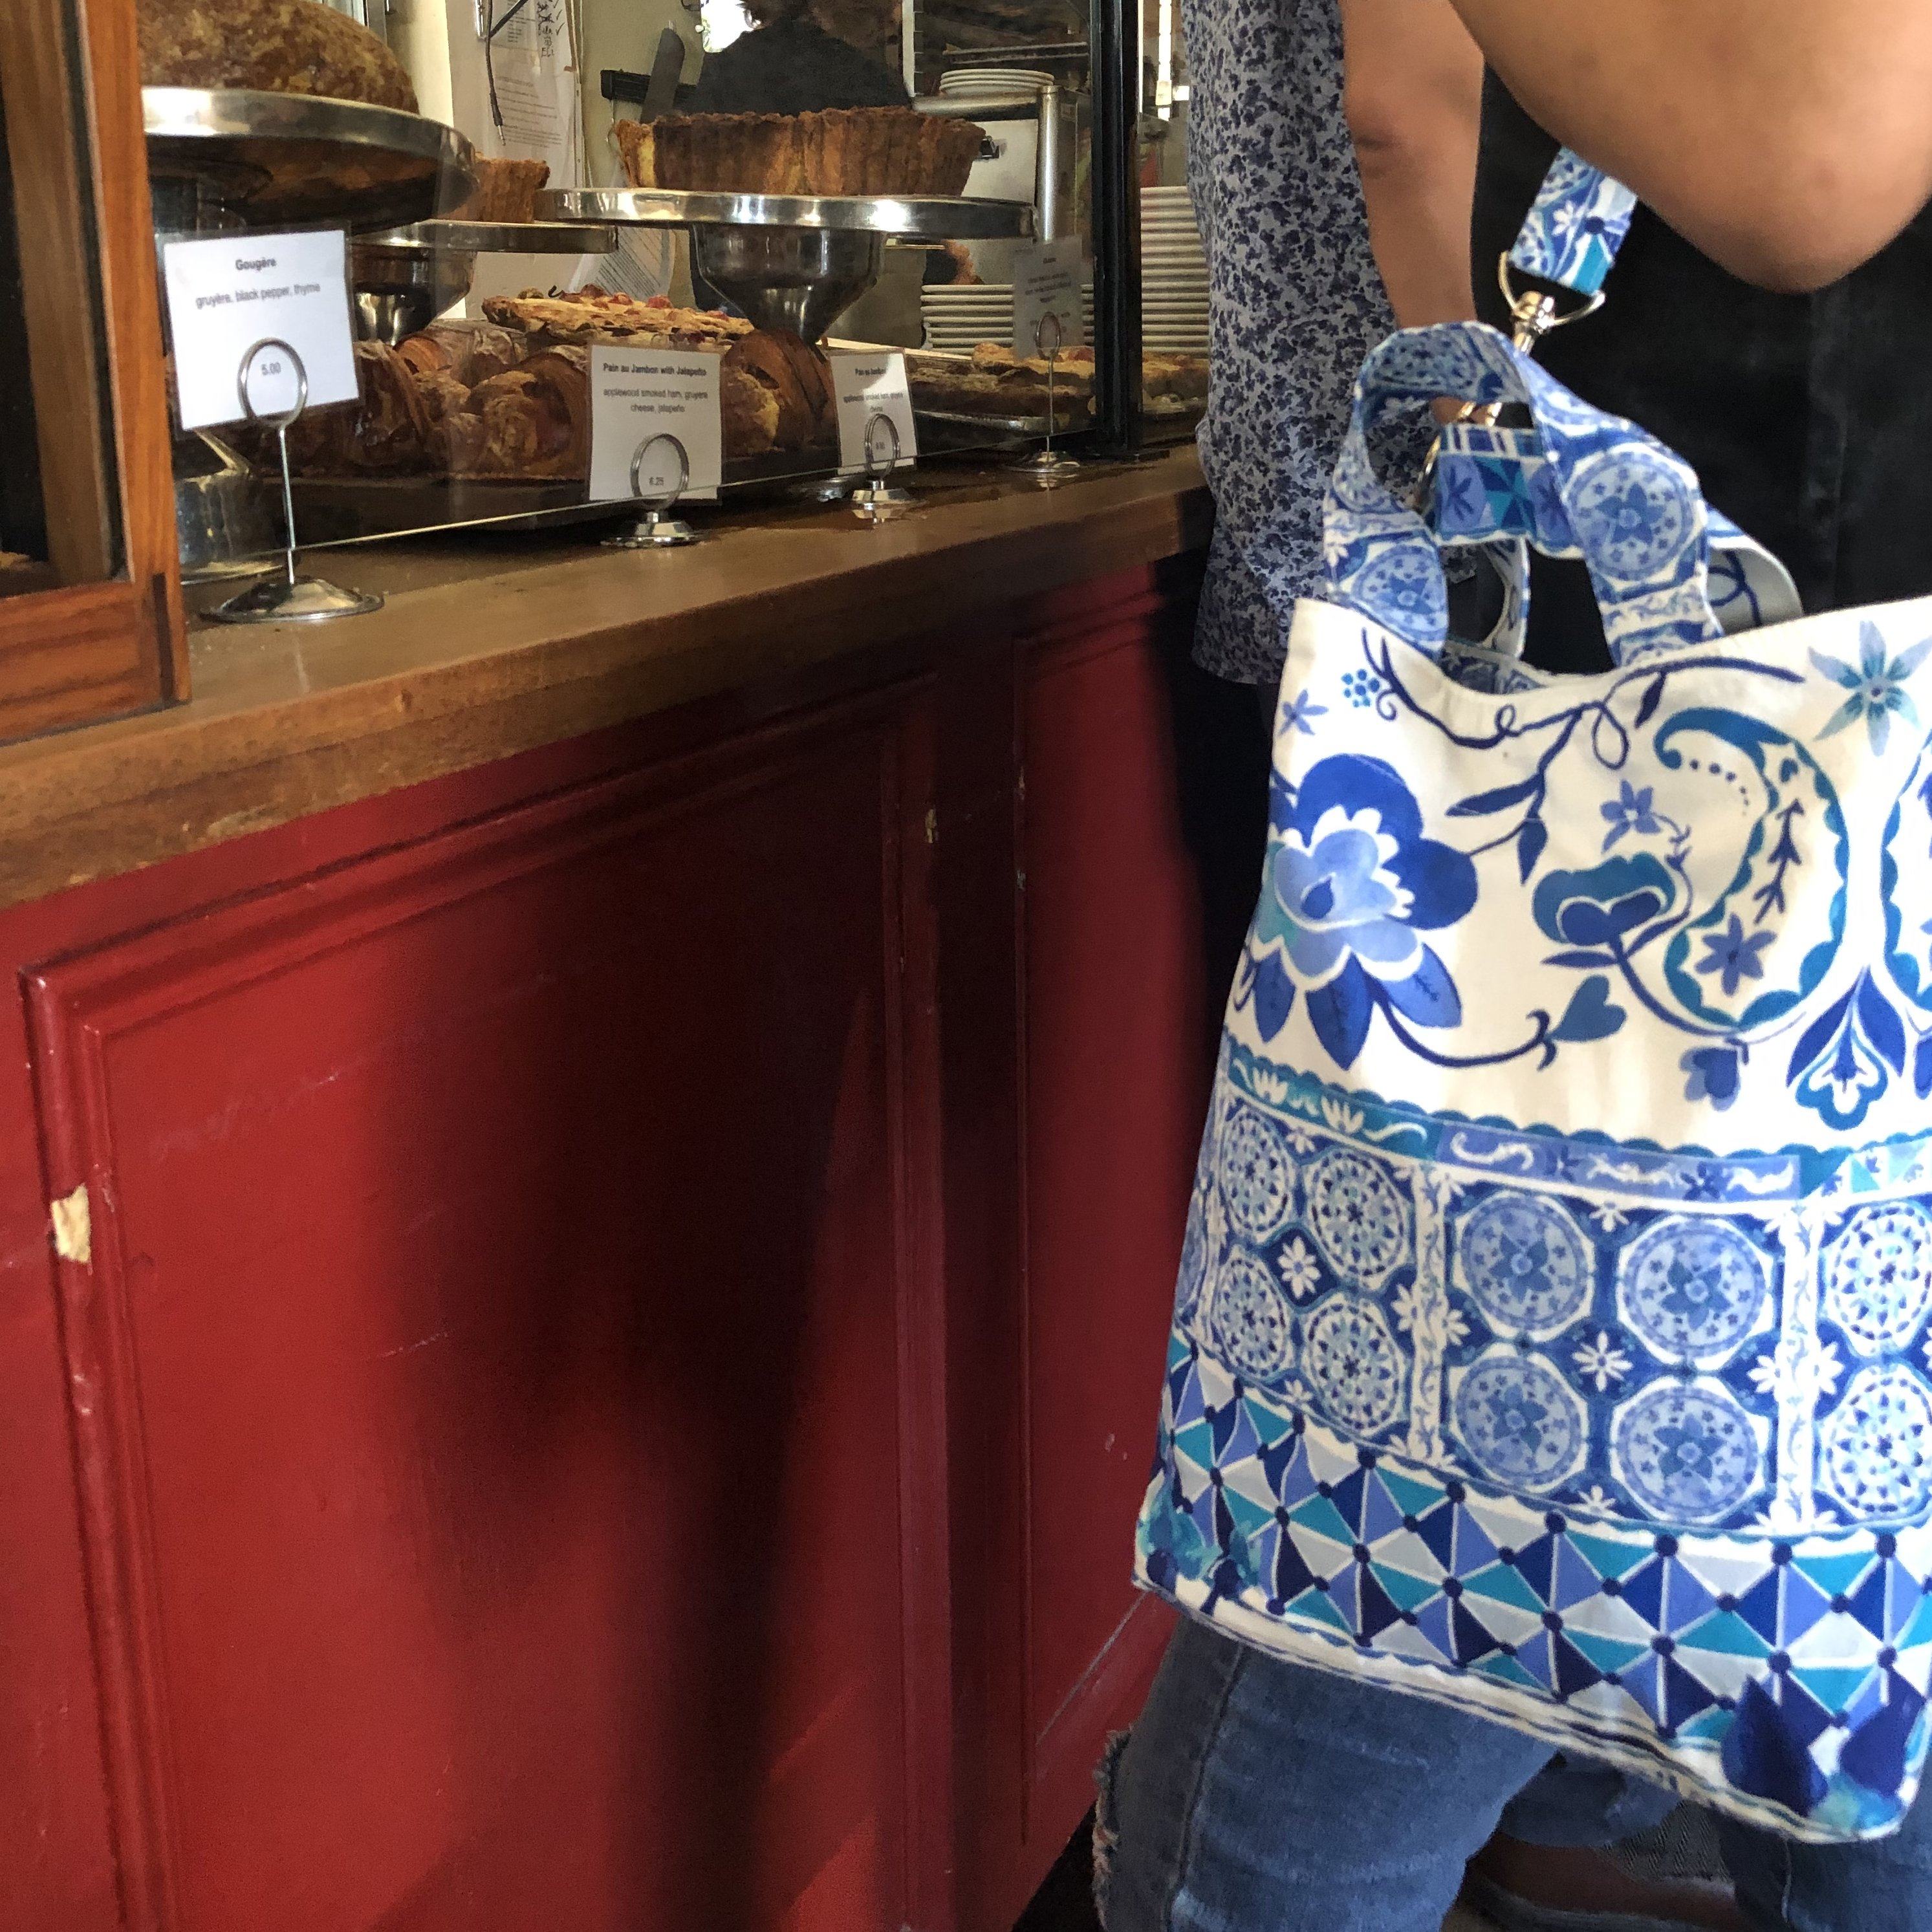 Bright Blue Paisley Floral Mosaic Tiles Patterned Print Duck Cross Body Cotton Tote Bag